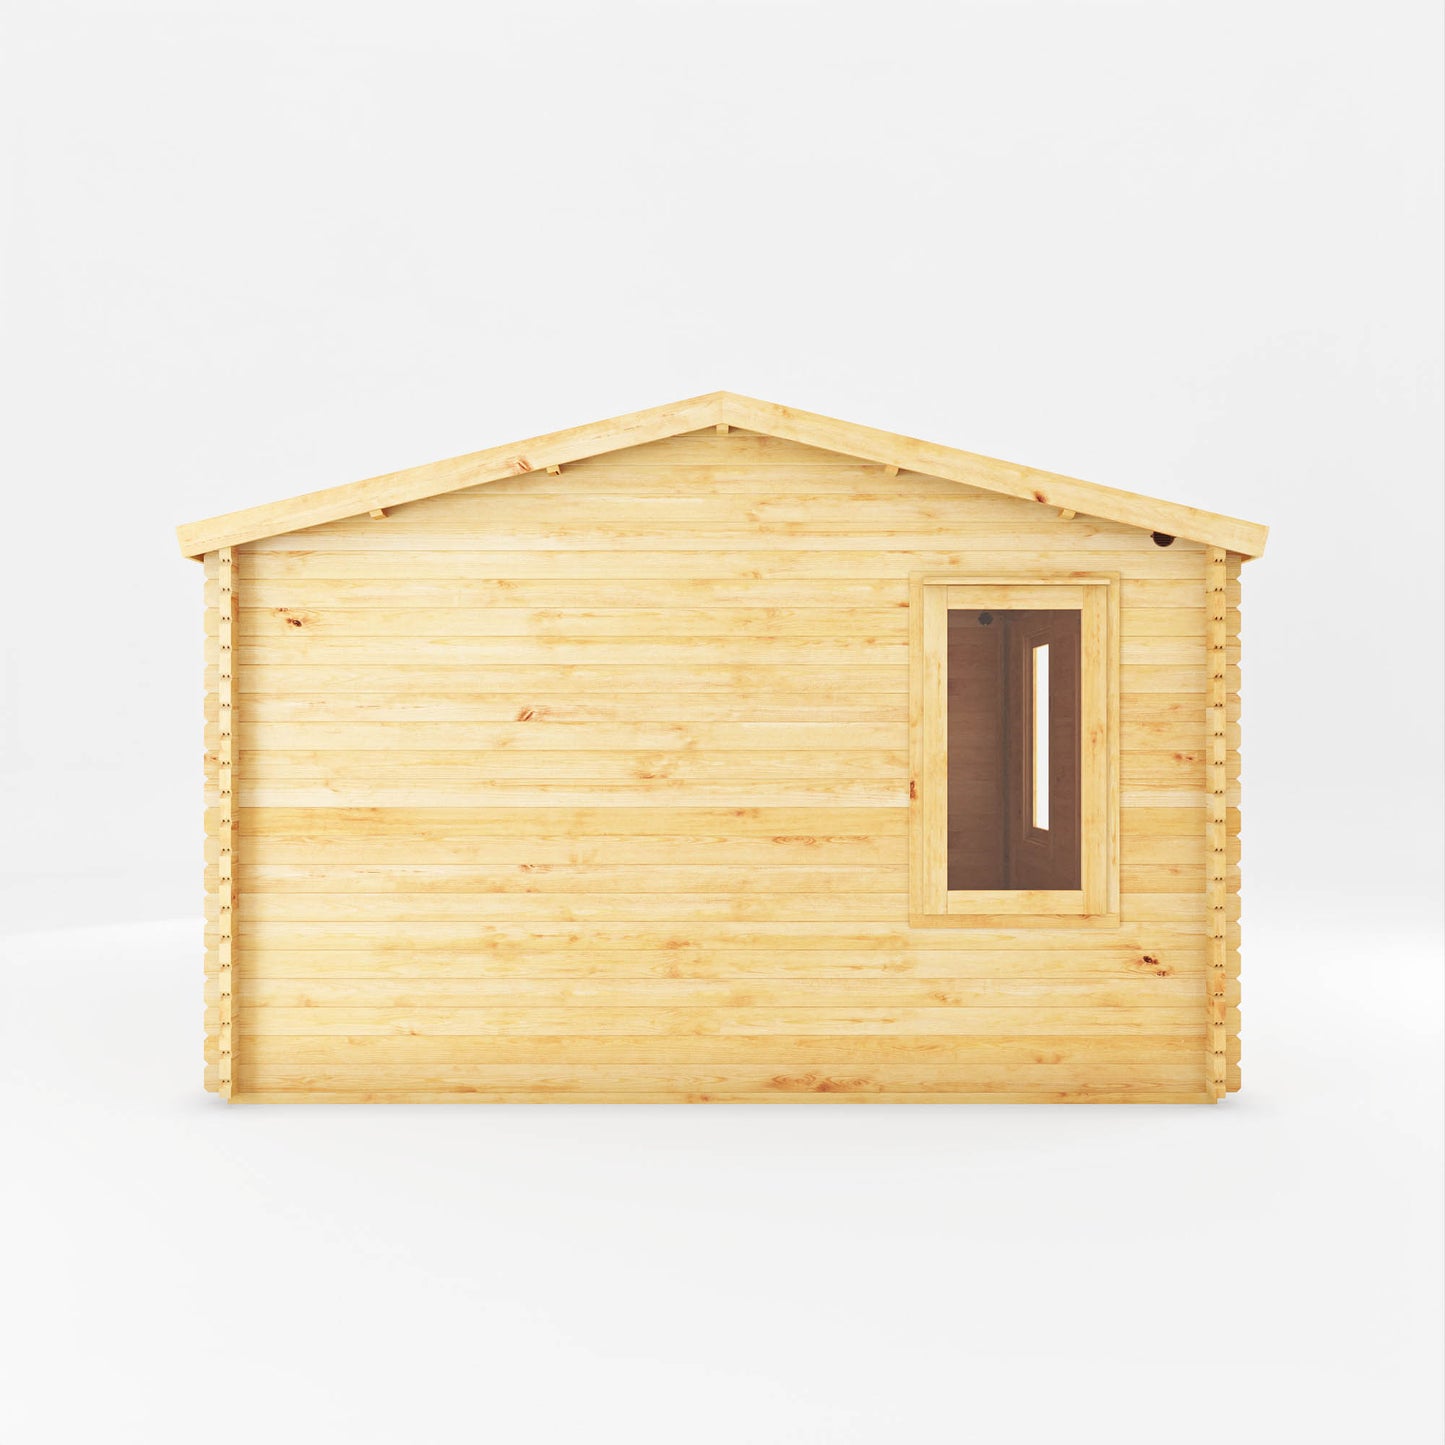 The 5.1m x 4m Robin Log Cabin With Side Shed